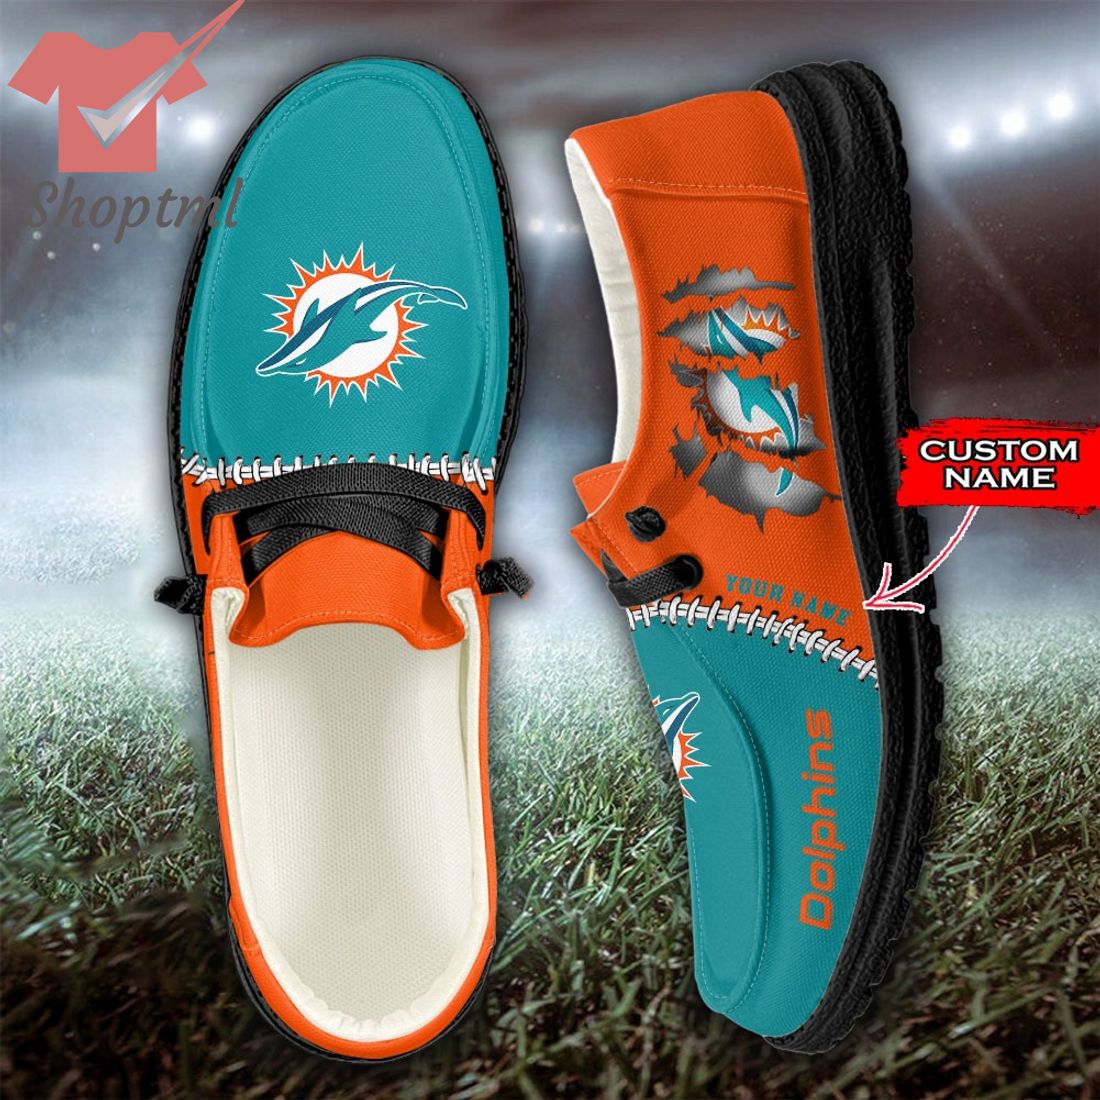 Nfl custom miami dolphins hey dudes shoes